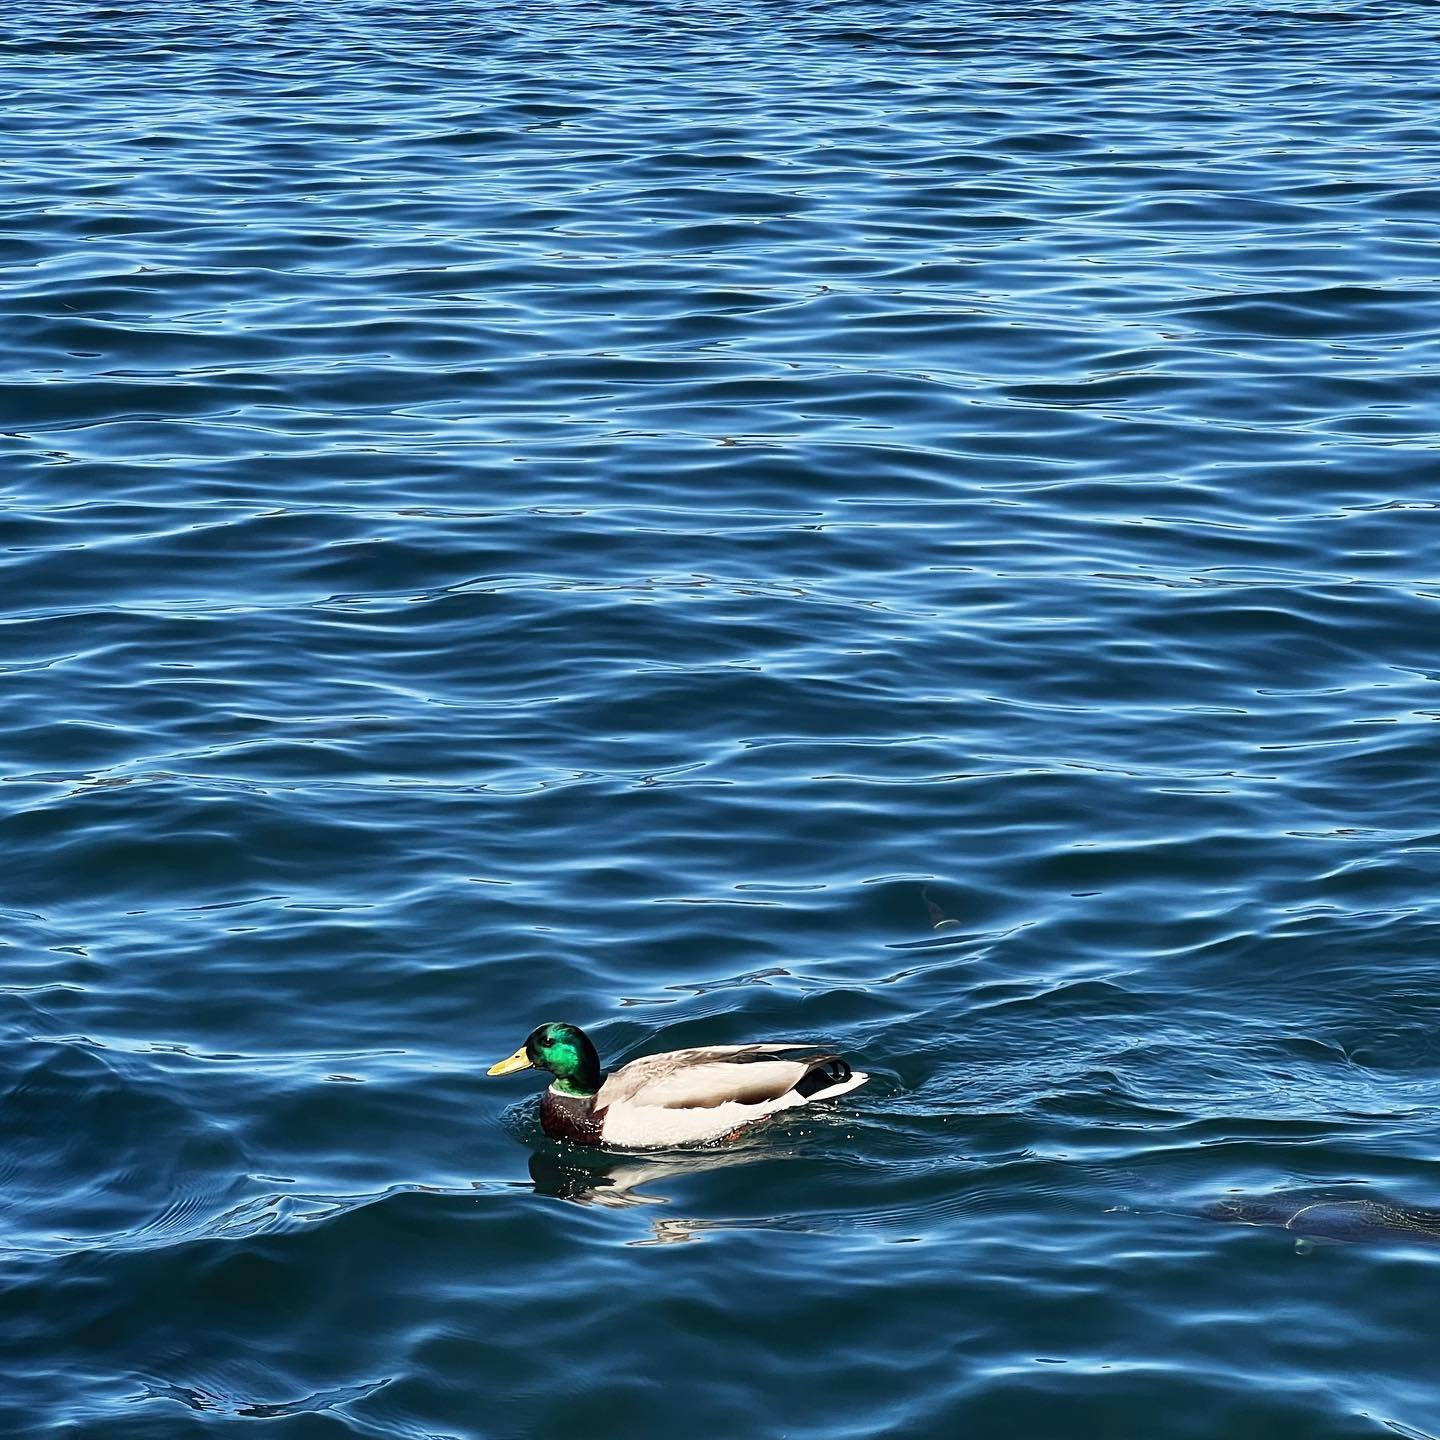 ☀️ It&rsquo;s finally starting to feel like Spring in #LakeArrowhead, as the last bit of snow melts in the sunshine. 🦆 The ducks are loving this warmer weather and so are we! Soon, the docks will be full of boats, locals will be cruising on the lake